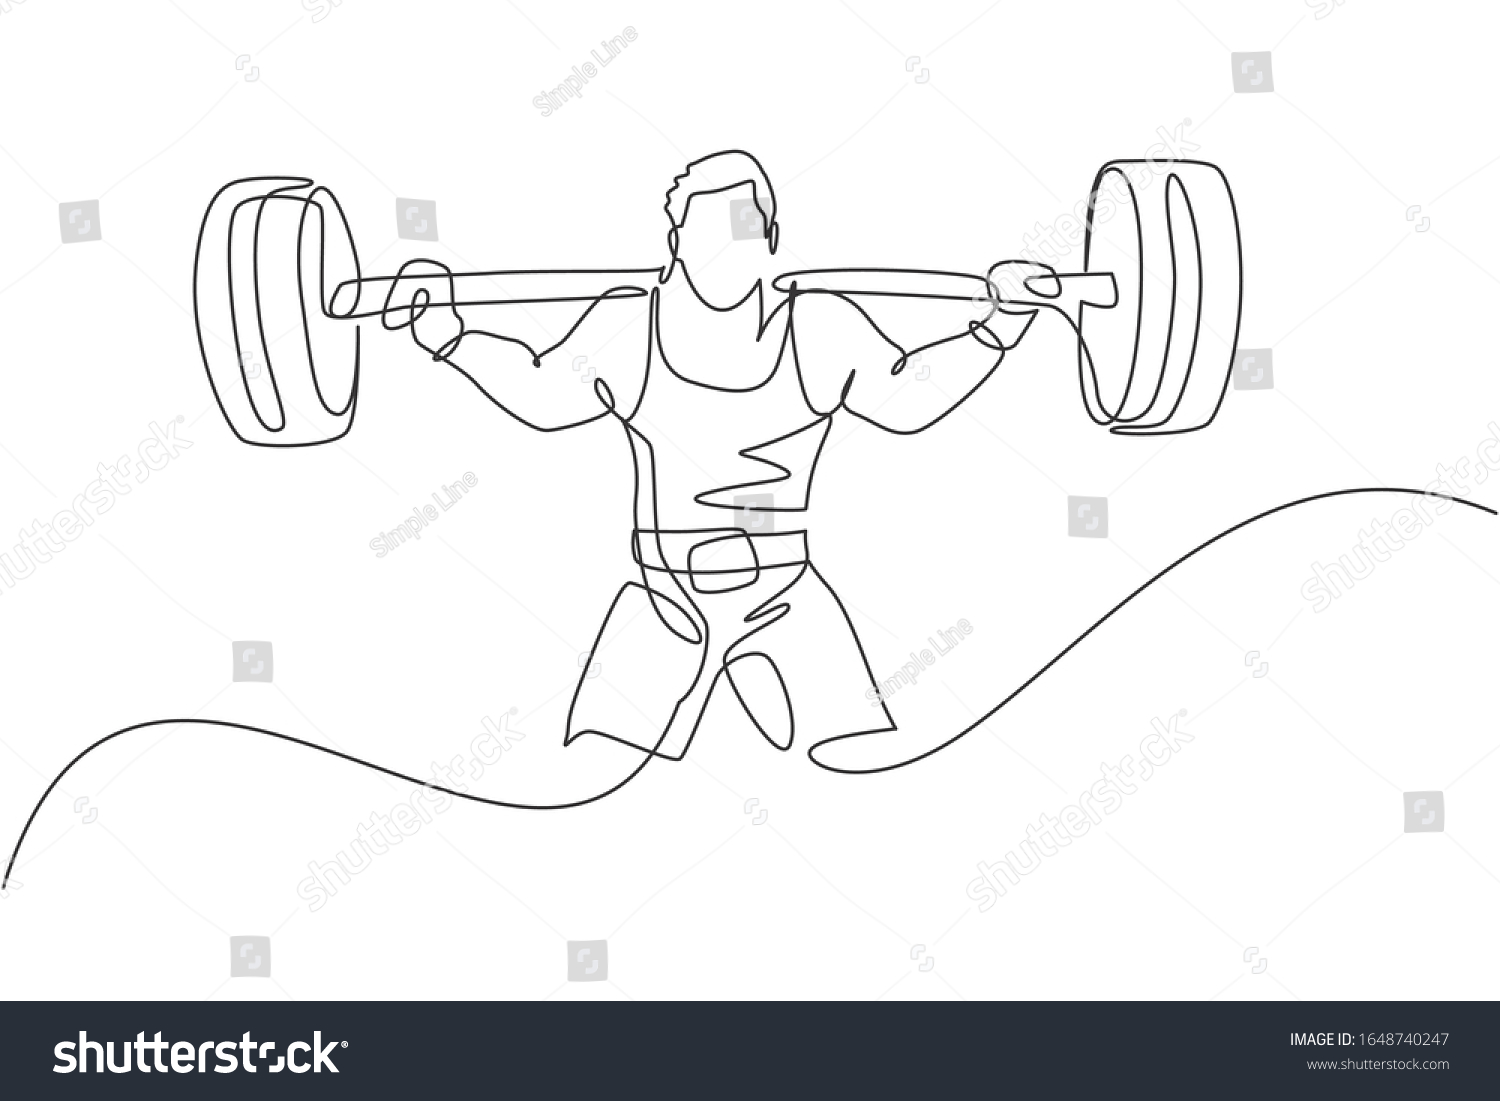 SVG of Single continuous line drawing of young strong weightlifter man preparing for barbell workout in gym. Weight lifting training concept. Trendy one line draw design vector graphic illustration svg